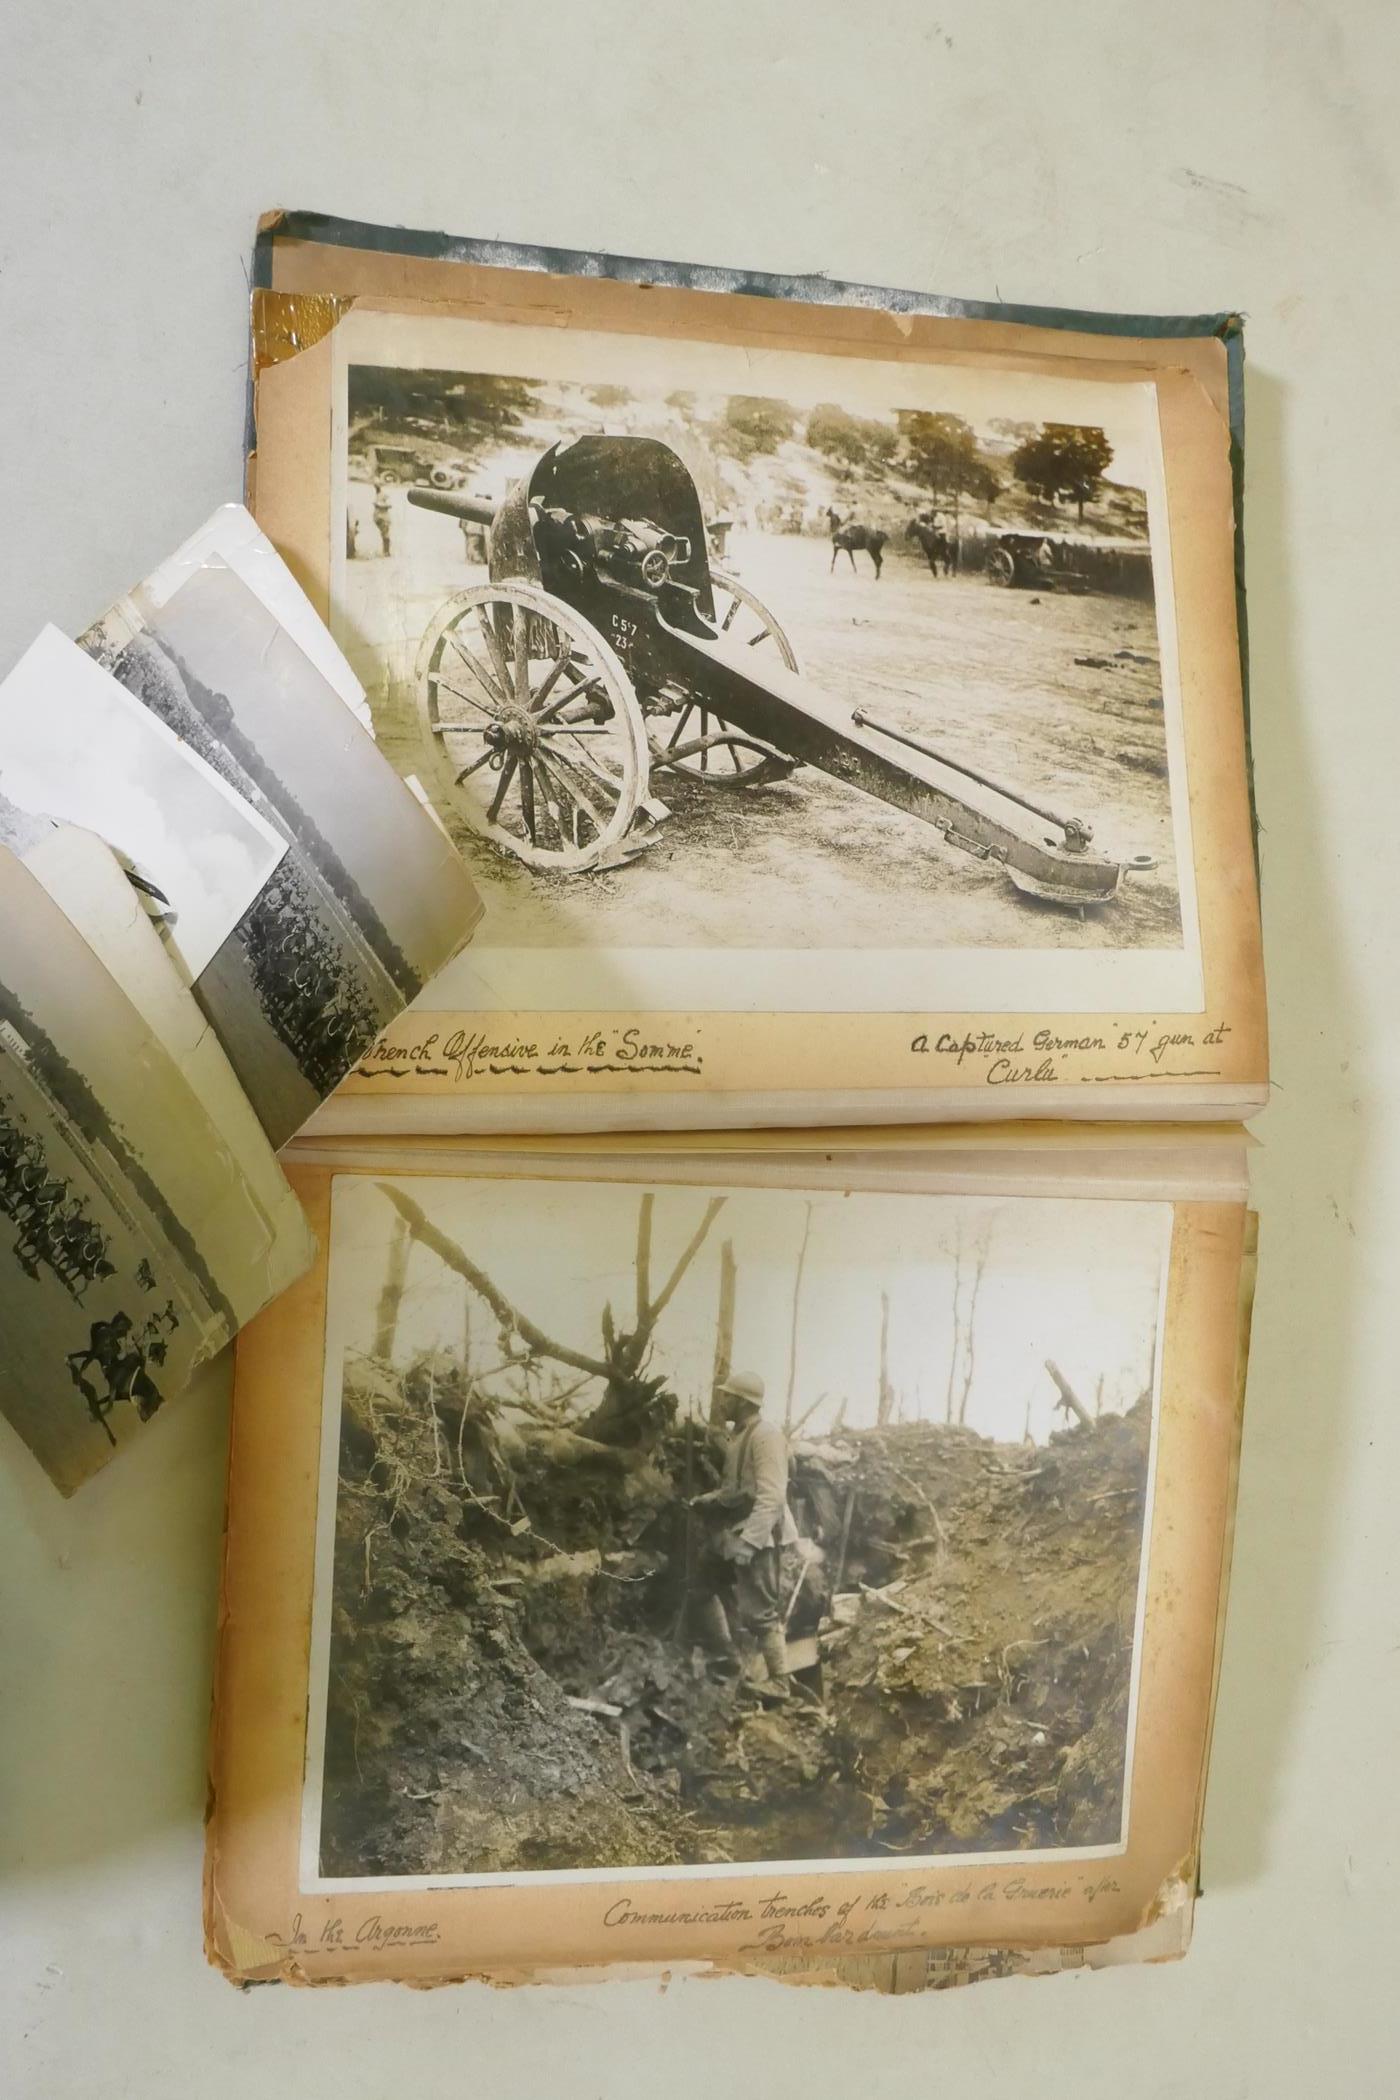 A scrap book of photographs from the Great War, images of the Western Front, artillery and trenches, - Image 3 of 5